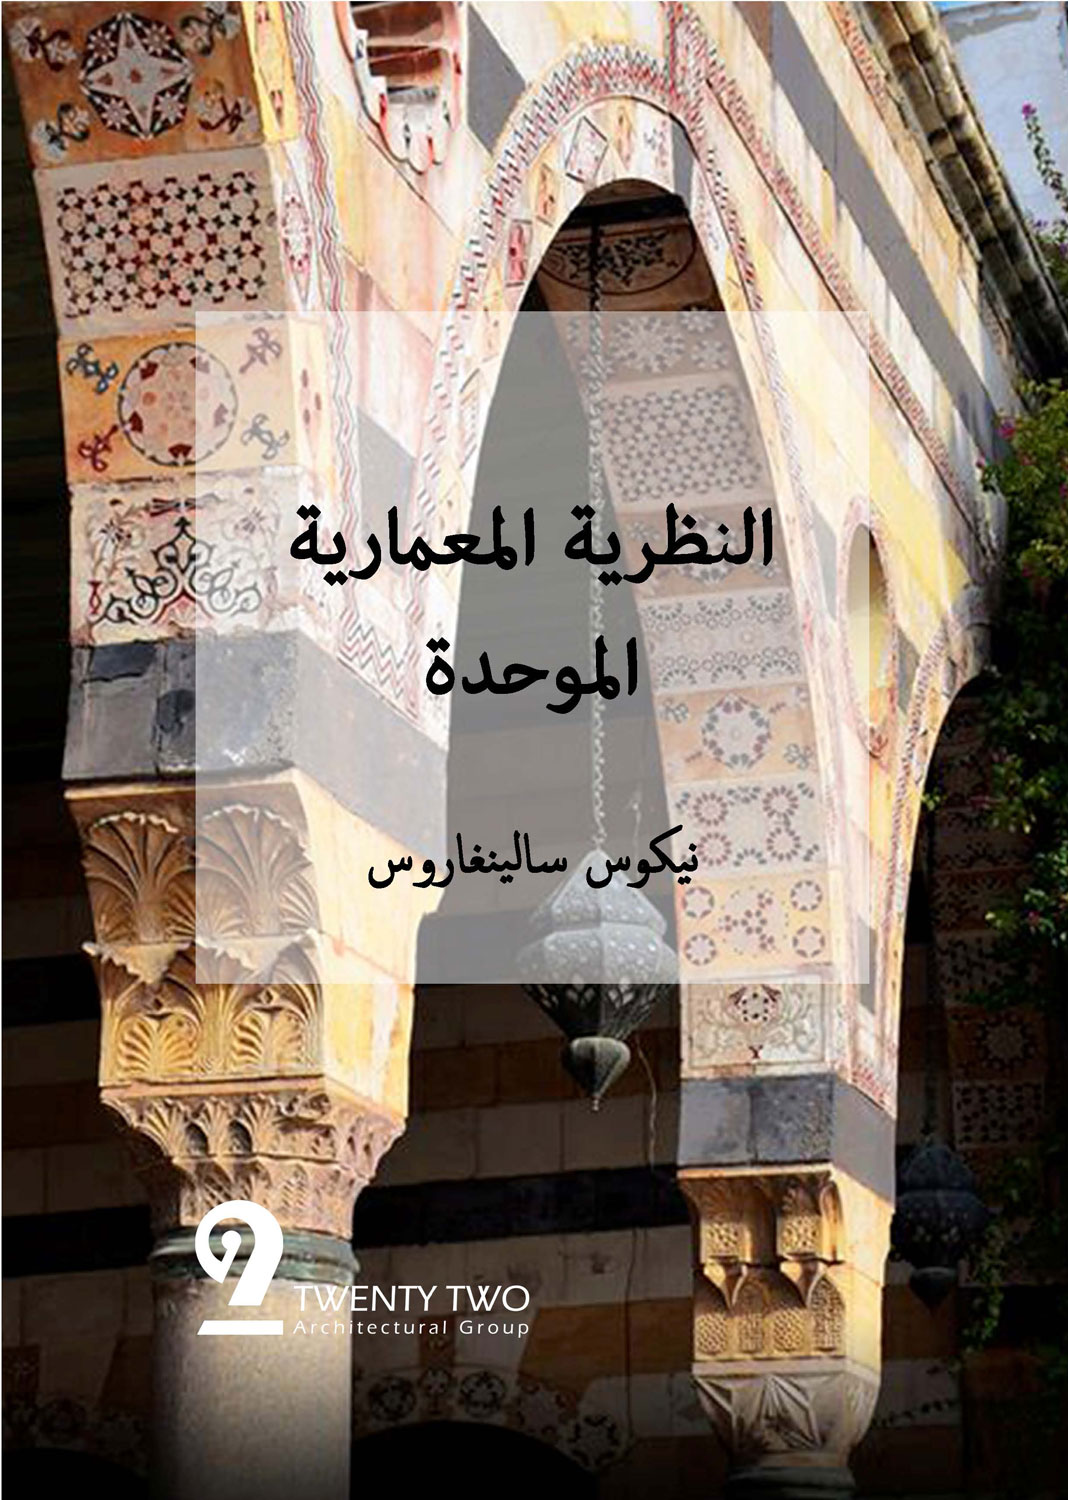 Zohar al-Jundi - <p>This booklet contains selected chapters from Unified Architectual Theory, which originally appeared online at&nbsp;<span style="text-indent: -8px;">http://www.archdaily.com/tag/unified-architectural-theory/ and in book form (</span><span style="text-indent: -8px;">Salingaros, Nikos A, and Christopher Alexander. 2013.&nbsp;</span><span style="box-sizing: border-box; text-indent: -8px;">Unified Architectural Theory</span><span style="text-indent: -8px;">. Portland, Or.: Sustasis Foundation.).</span></p><blockquote>What theory generates the architecture of a new,
sustainable built environment that saves us from environmental collapse? This
approach to architecture is very different from the way it is currently taught,
and suggests a new attitude towards the discipline itself. Widespread damage to
culture occurs when common people are influenced by extractive globalism to
build against human nature, and politicians approve monstrous buildings just
because they see those images in the media. The Arabic-speaking world has a
beautiful tradition of architecture set in a characteristically complex urban
fabric, and contemporary architects and urbanists should pay more attention to
those. After reading this book, clients and government officials can feel
secure enough to respect their local architectural traditions. Backed by the
arguments that I offer, intelligent people can insist that thousands of years
of culture, including practical knowledge about low-cost sustainability, not be
violated by flashy and unsustainable alien importations. This synthesis makes
sense of buildings from all ages: historical, vernacular, to cutting-edge
architectural creations. This book cuts through the often-incomprehensible fog
of contemporary architectural discourse to reveal sound theoretical foundations
for design. By introducing scientific thinking into architecture, one can
actually estimate simple numerical factors that contribute to the adaptive and
emotional success of a building.</blockquote><p>--Nikos Salingaros, 2017</p>